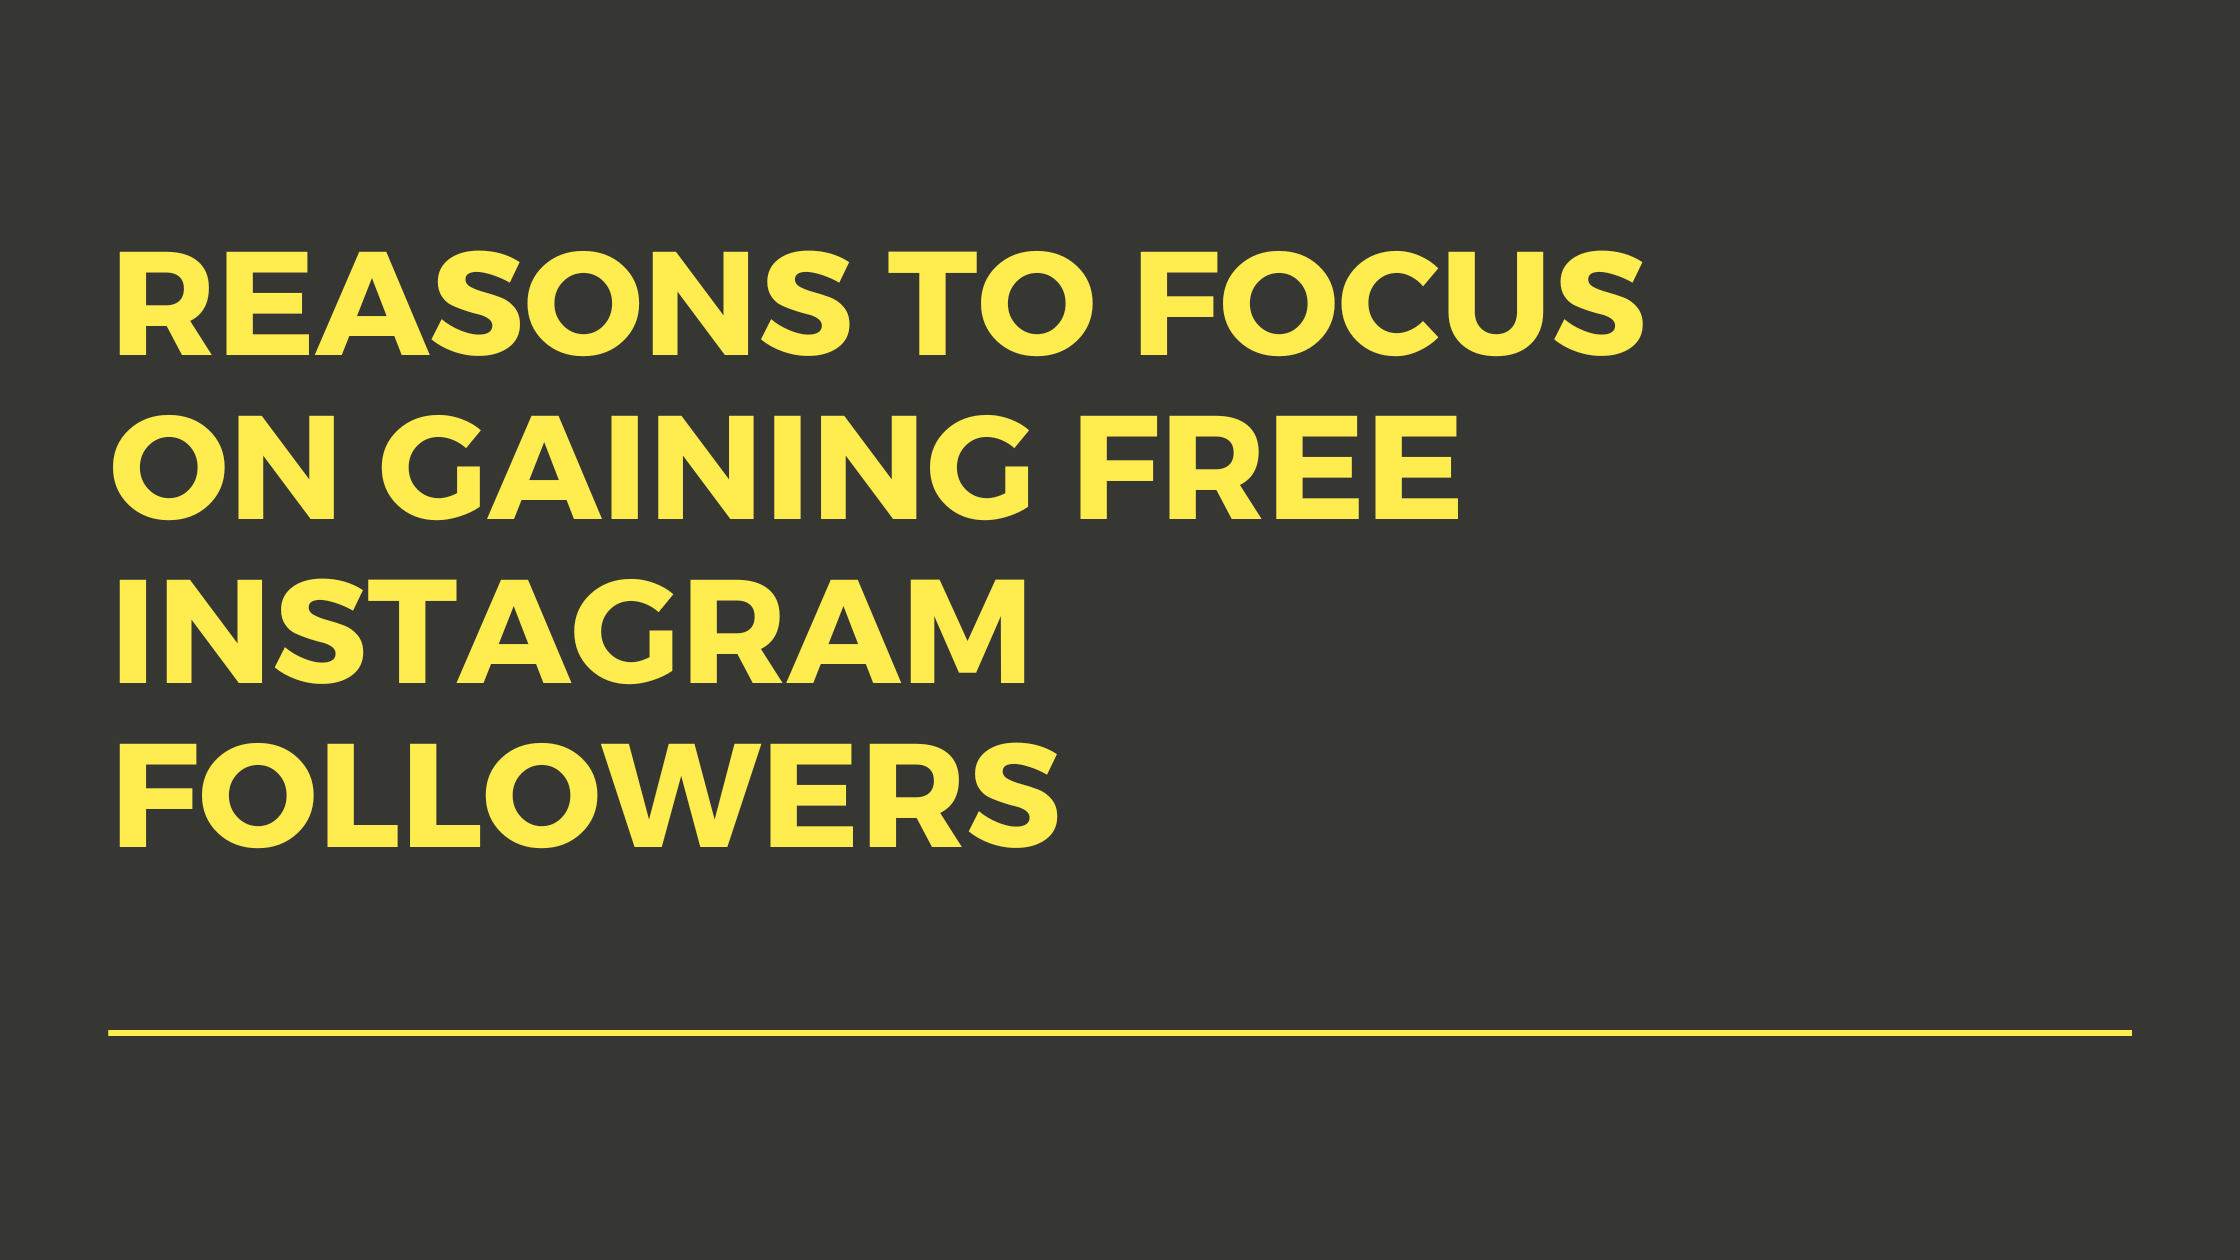 Reasons to Focus on gaining free Instagram followers